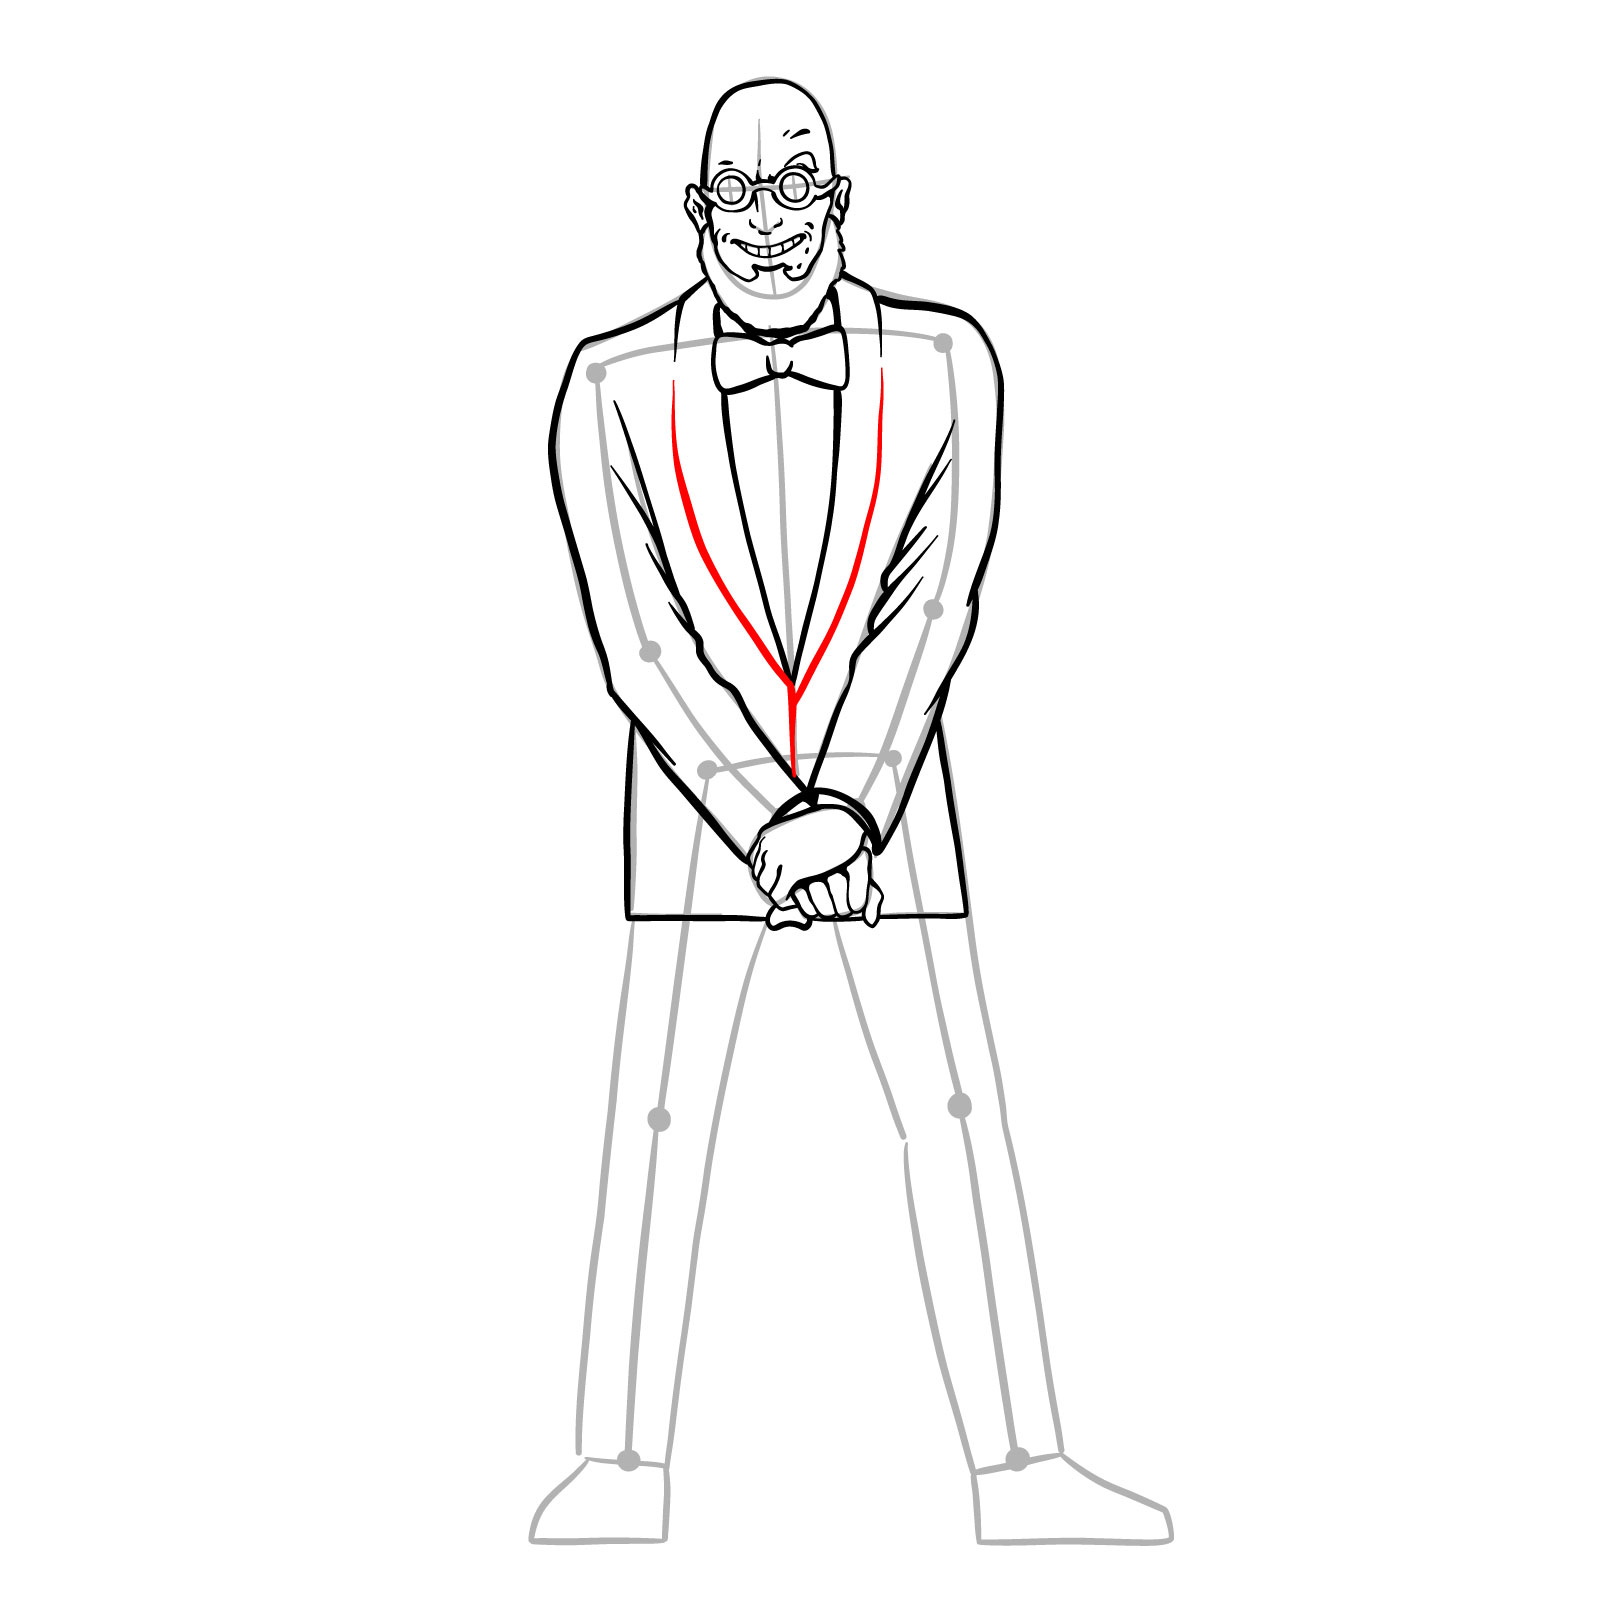 How to draw Dr. Hugo Strange from DC Comics - step 25